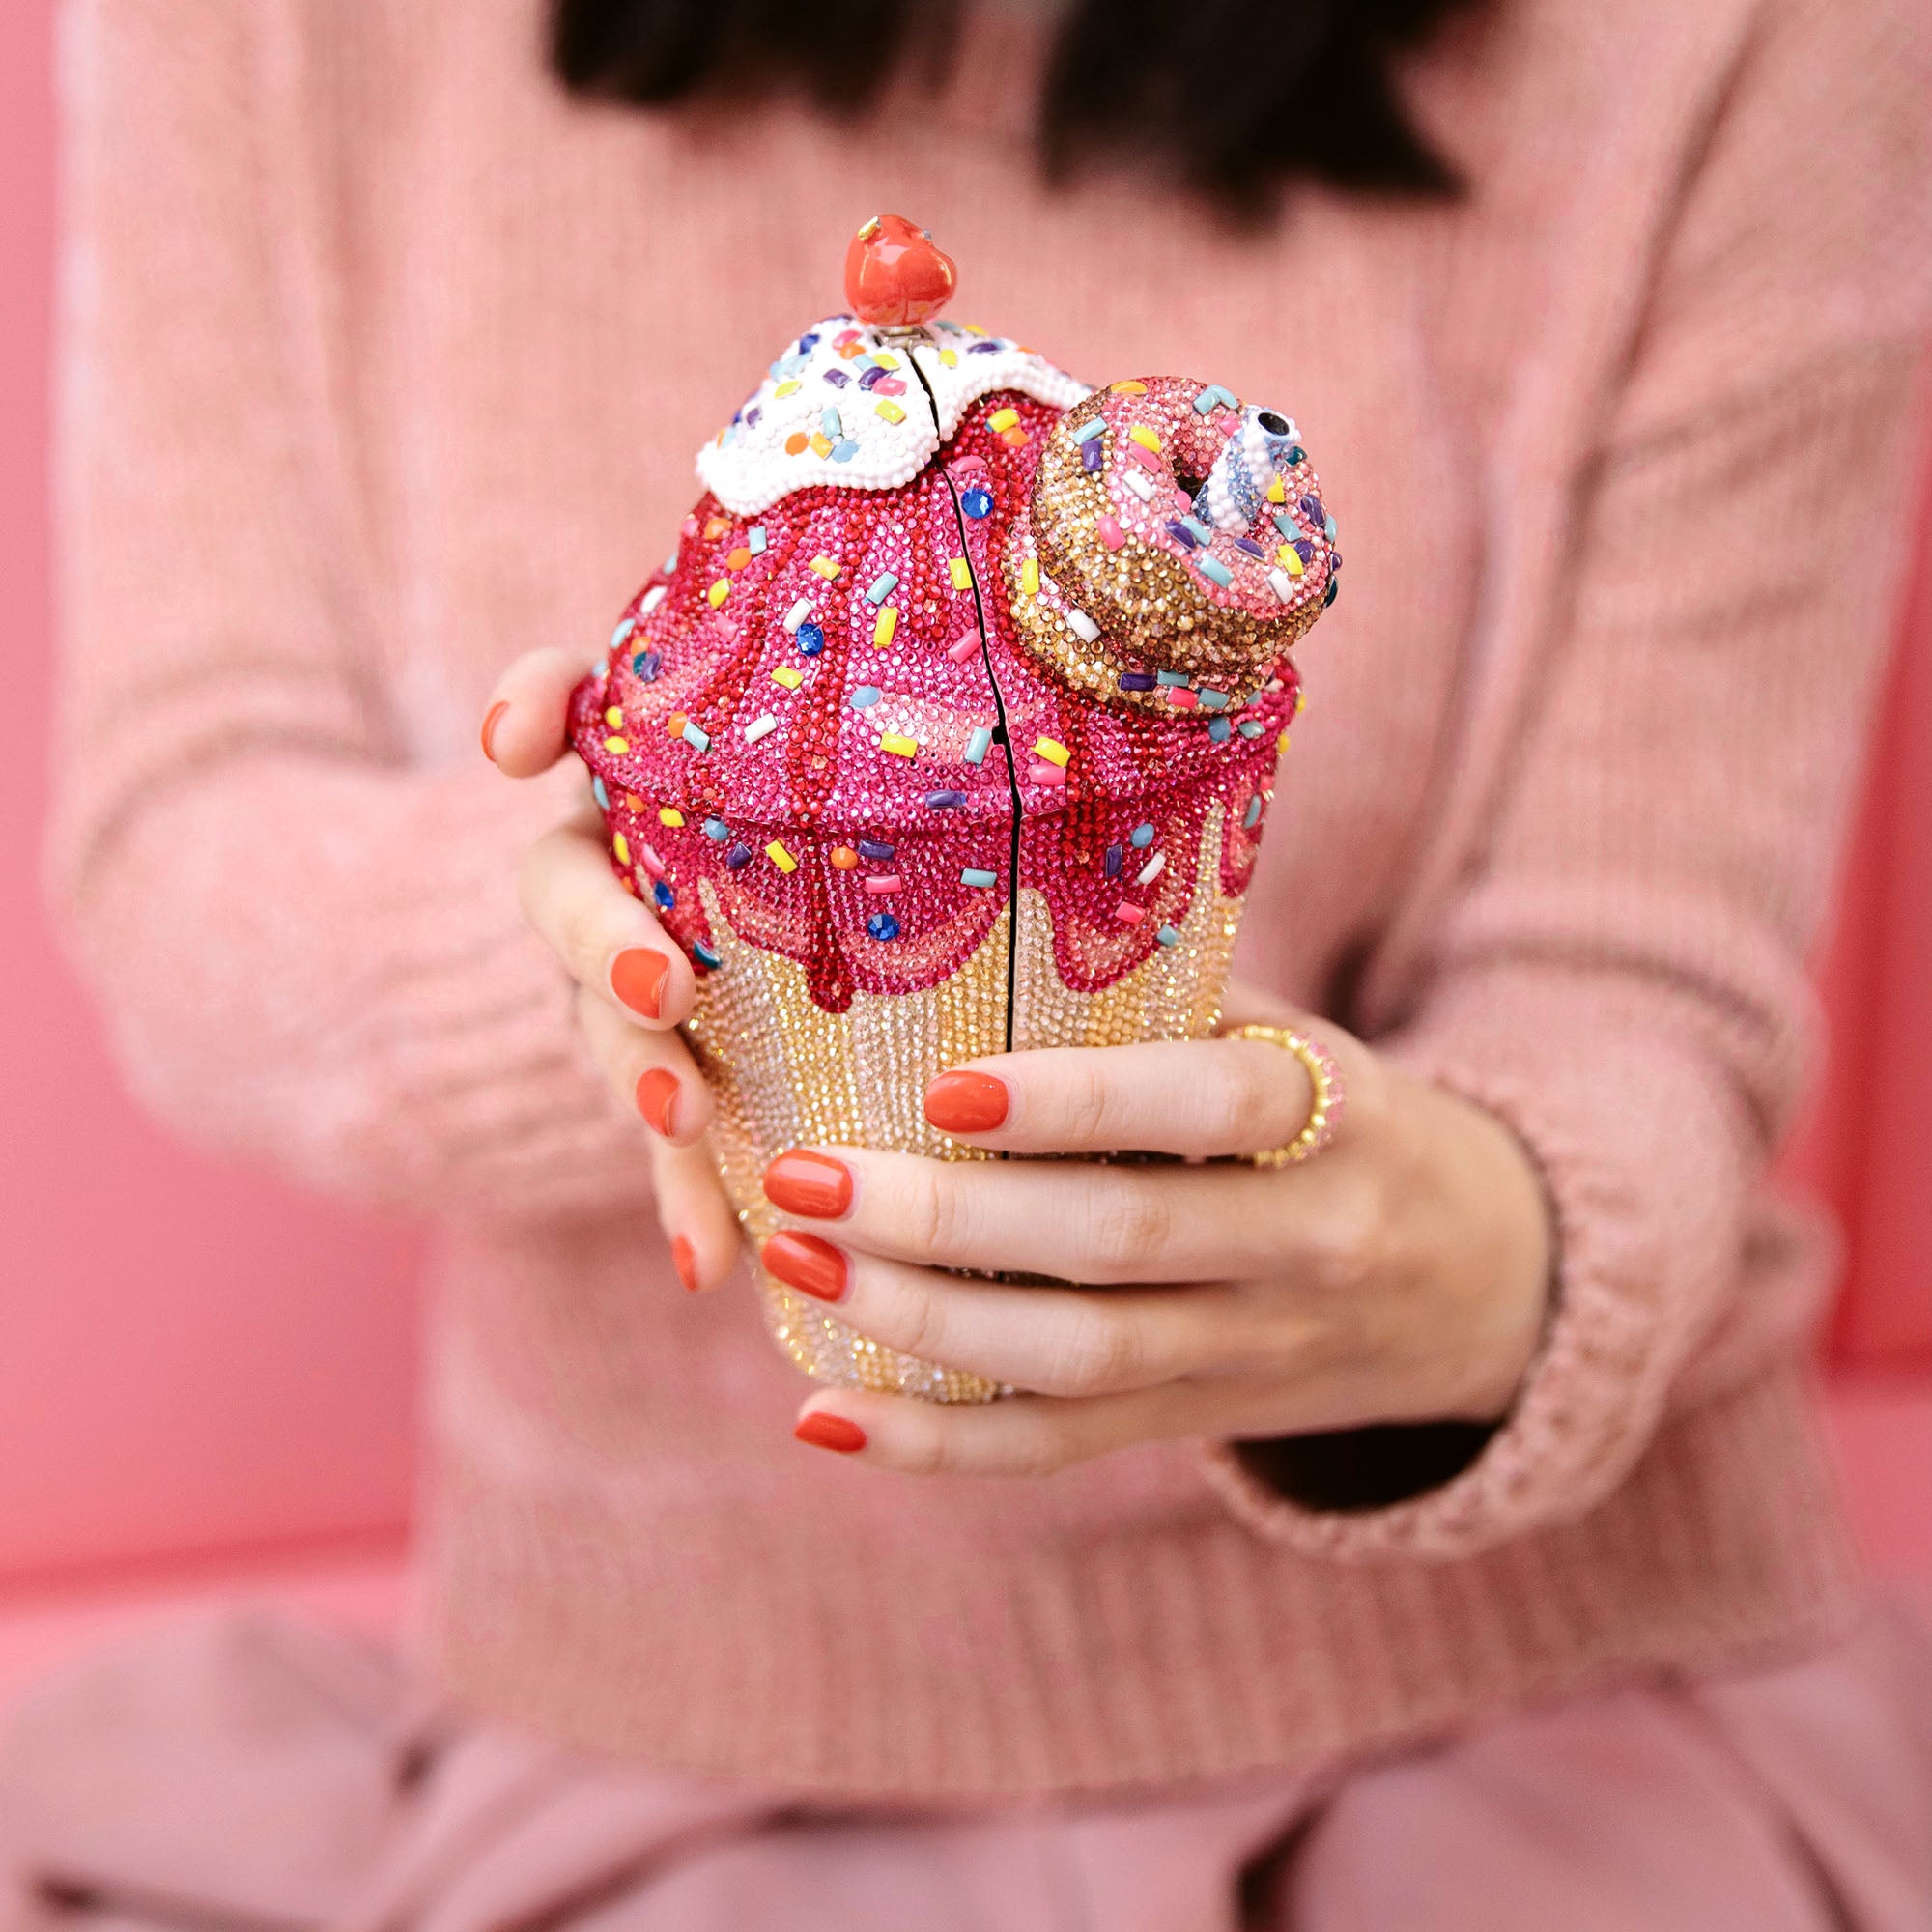 Judith Leiber knows the way to my heart, with crystals hot fudge sundaes -  PurseBlog